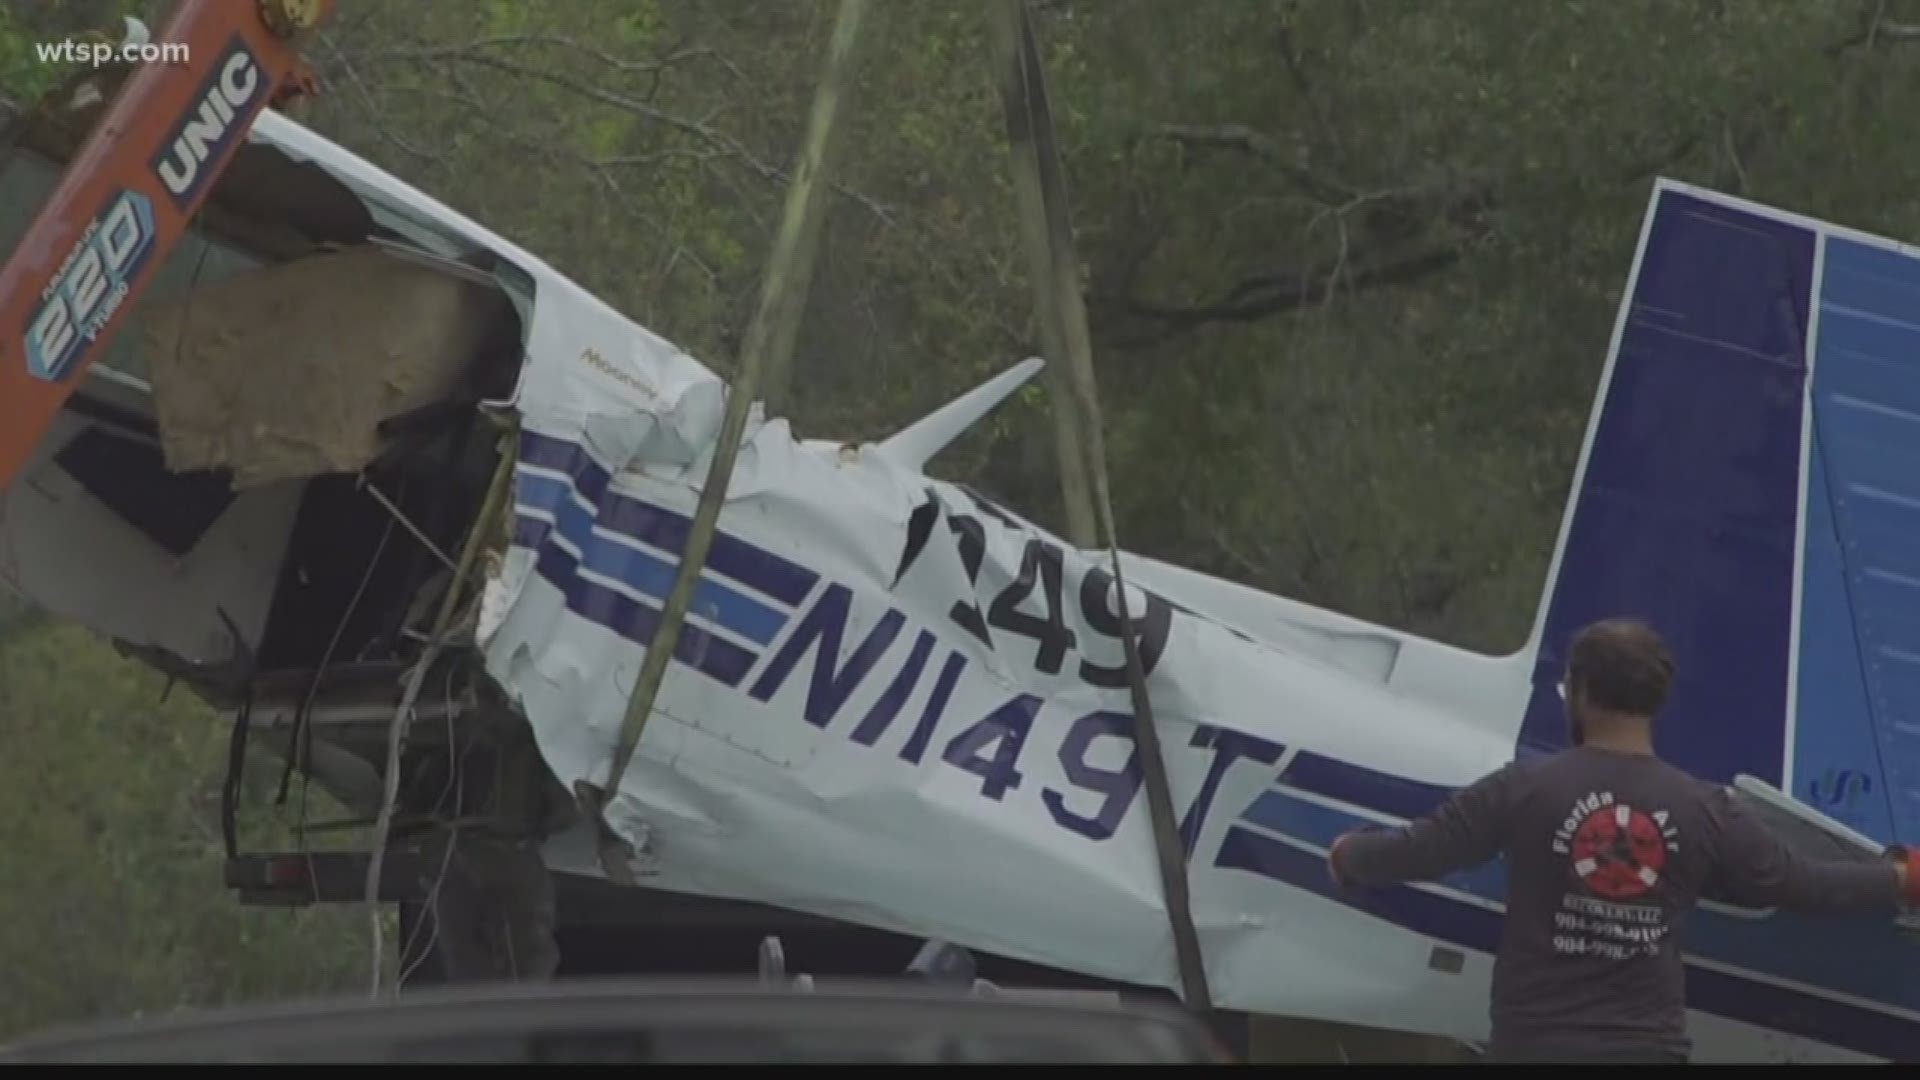 A preliminary report from the National Transportation Safety Board explains what led up to a deadly Bartow plane crash.